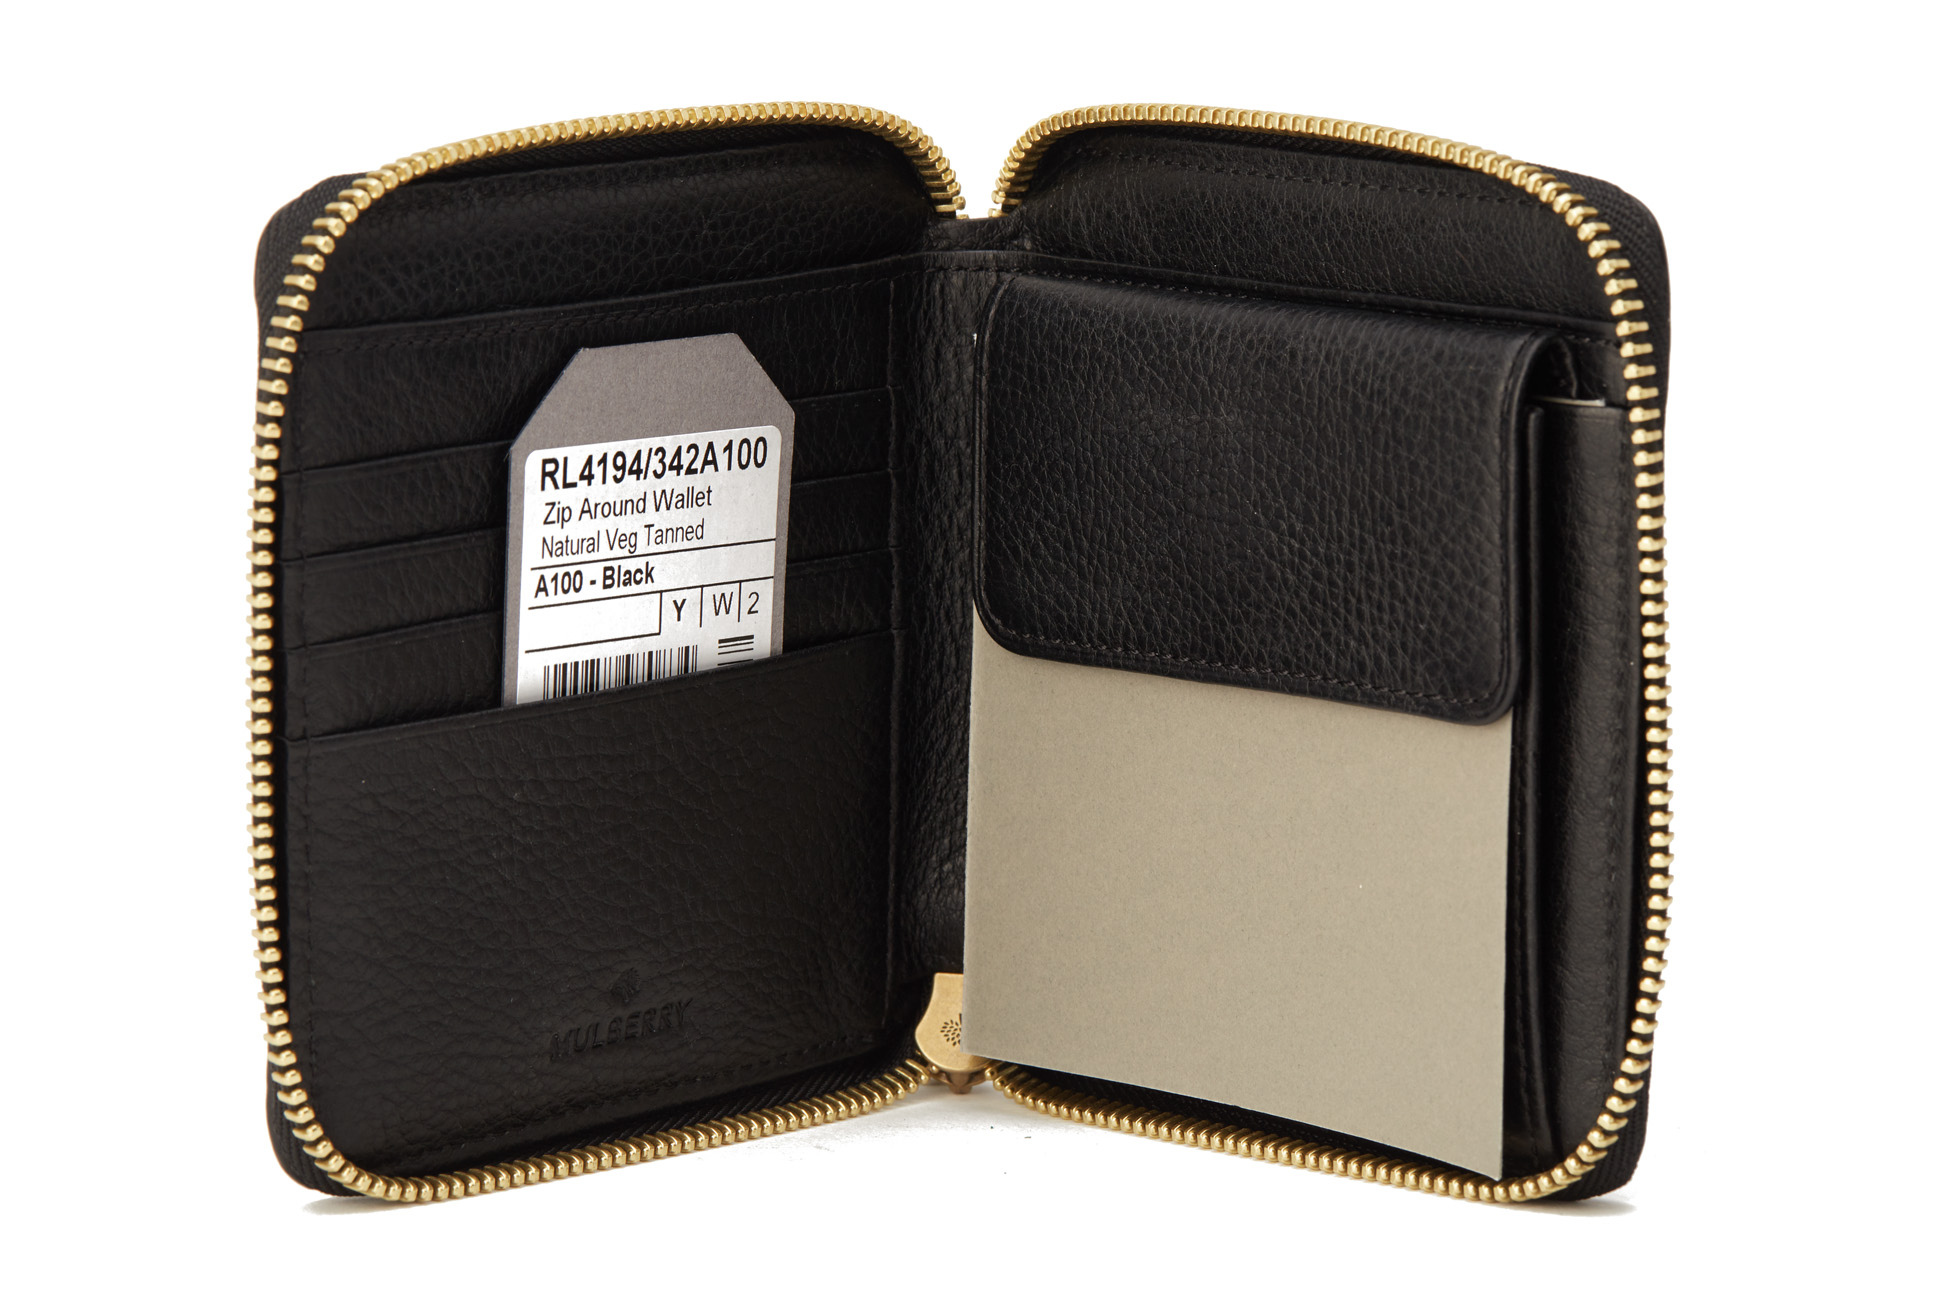 A MULBERRY BLACK ZIP AROUND WALLET - Image 2 of 3